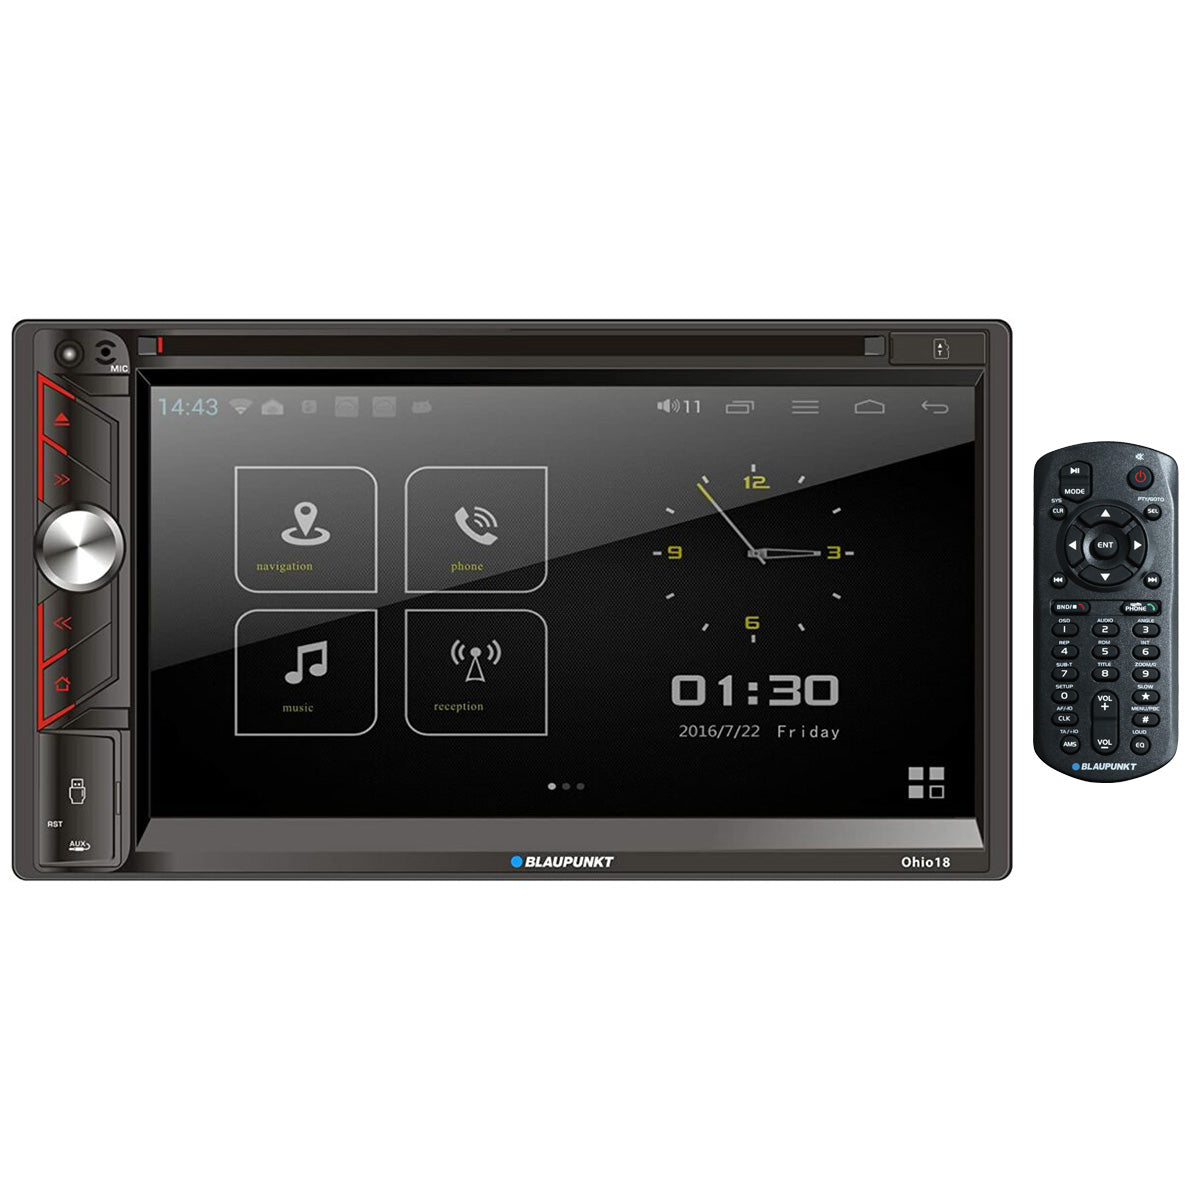 Blaupunkt OHIO18 Touchscreen 6.9 Inch Dvd Receiver With Bluetooth Usb/Sd